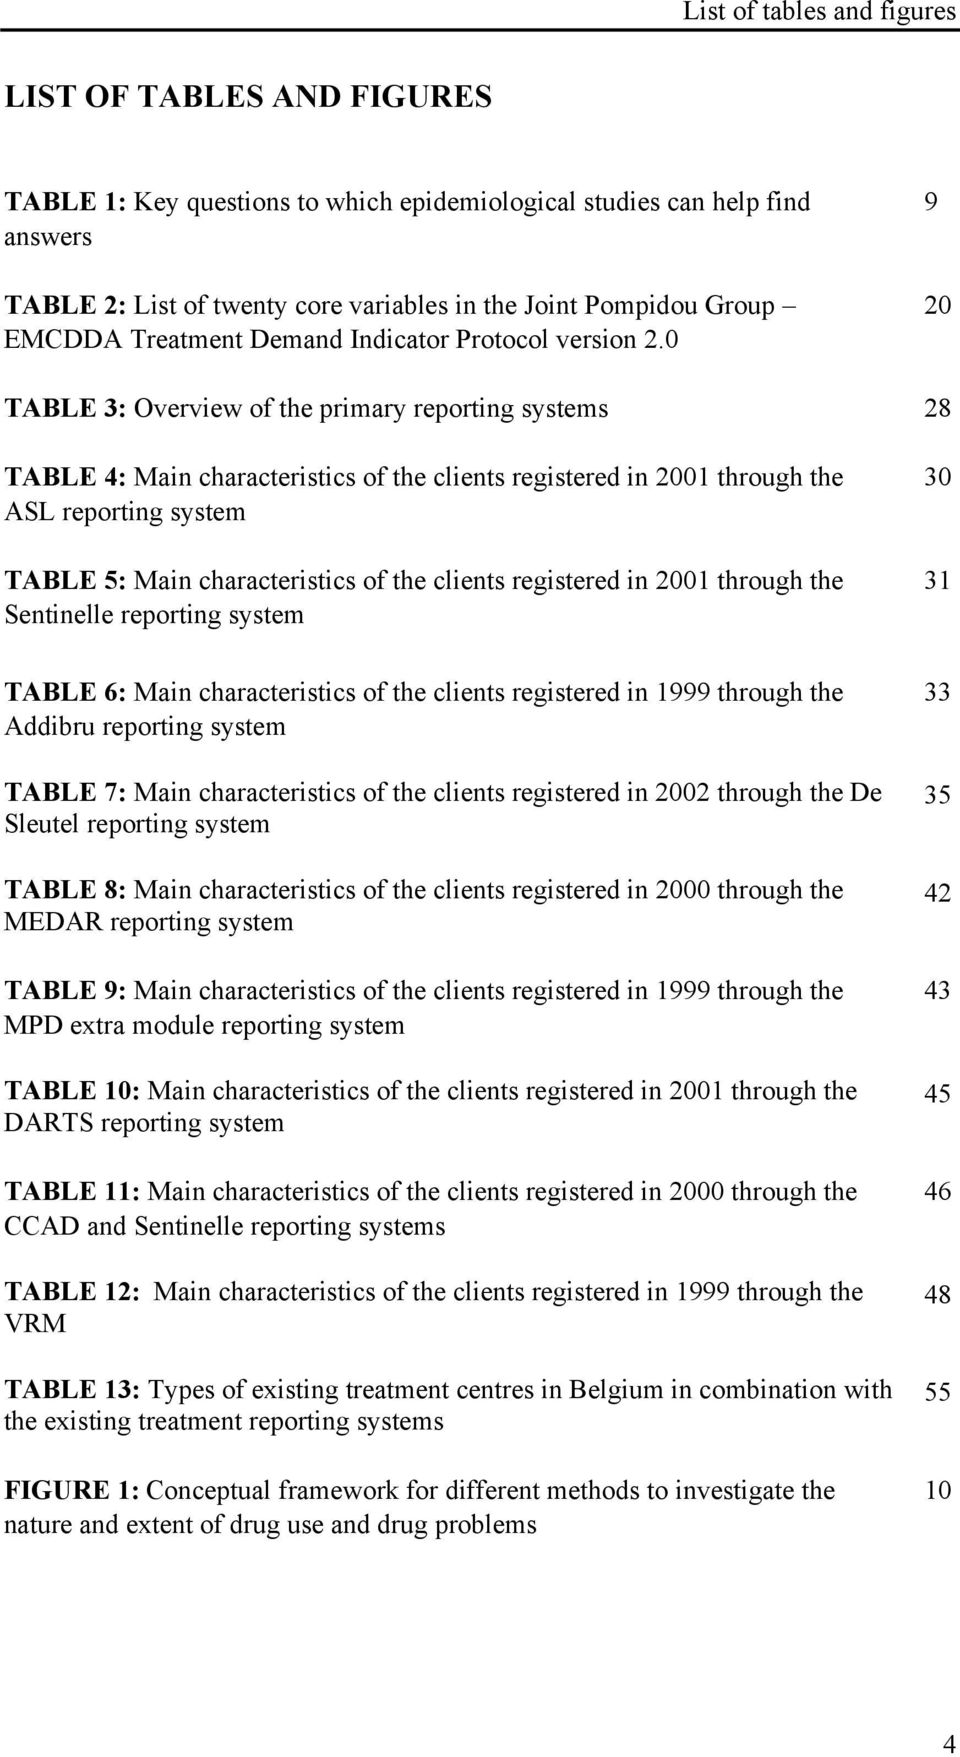 0 9 20 TABLE 3: Overview of the primary reporting systems 28 TABLE 4: Main characteristics of the clients registered in 2001 through the ASL reporting system TABLE 5: Main characteristics of the